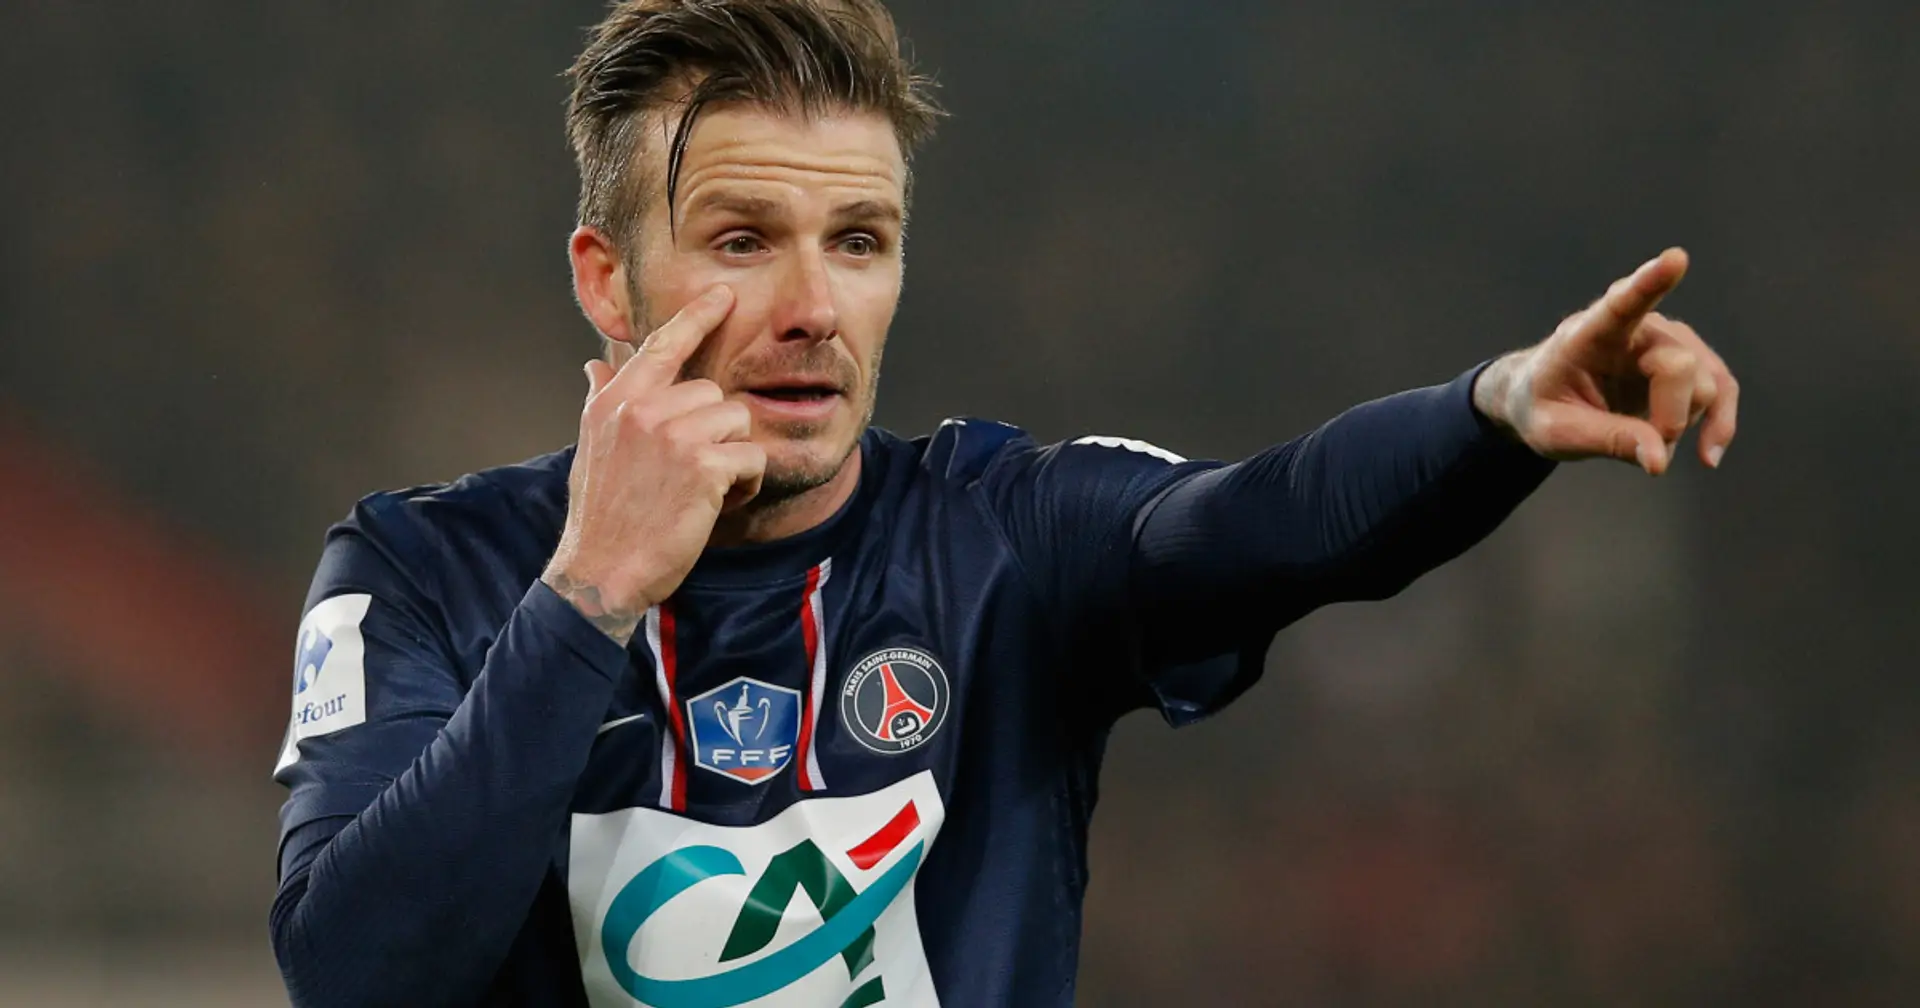 David Beckham donated 100% of wages to charity during PSG spell